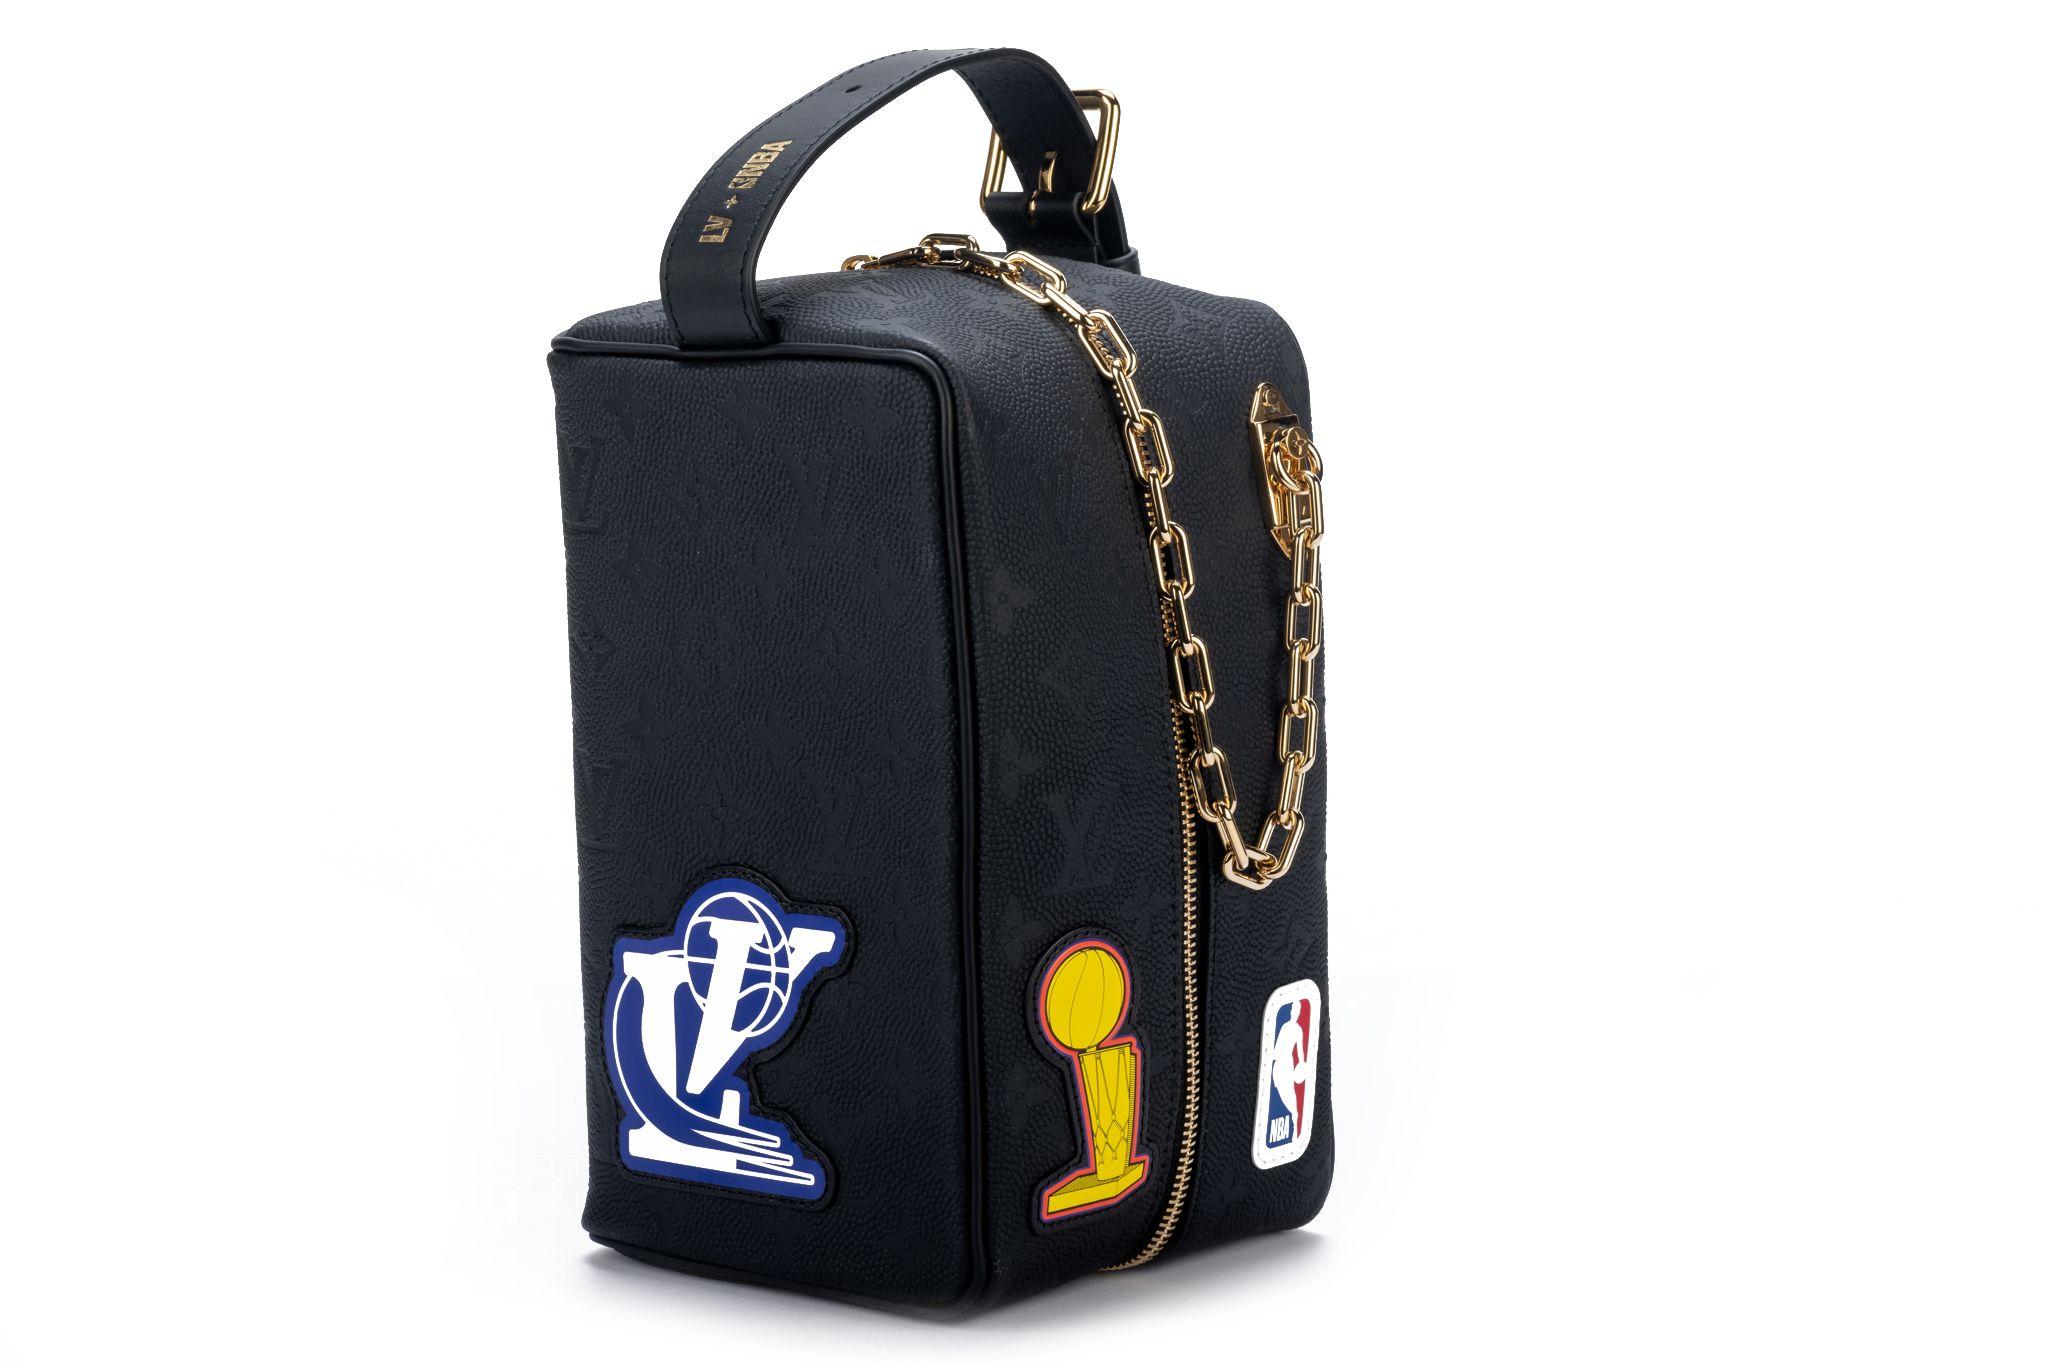 As part of the Louis Vuitton x NBA Season 2 capsule collection, the cloakroom dopp kit is made from black monogram-embossed leather and decorated with print and patches inspired by basketball championship jackets The adjustable leather handle (2.5'